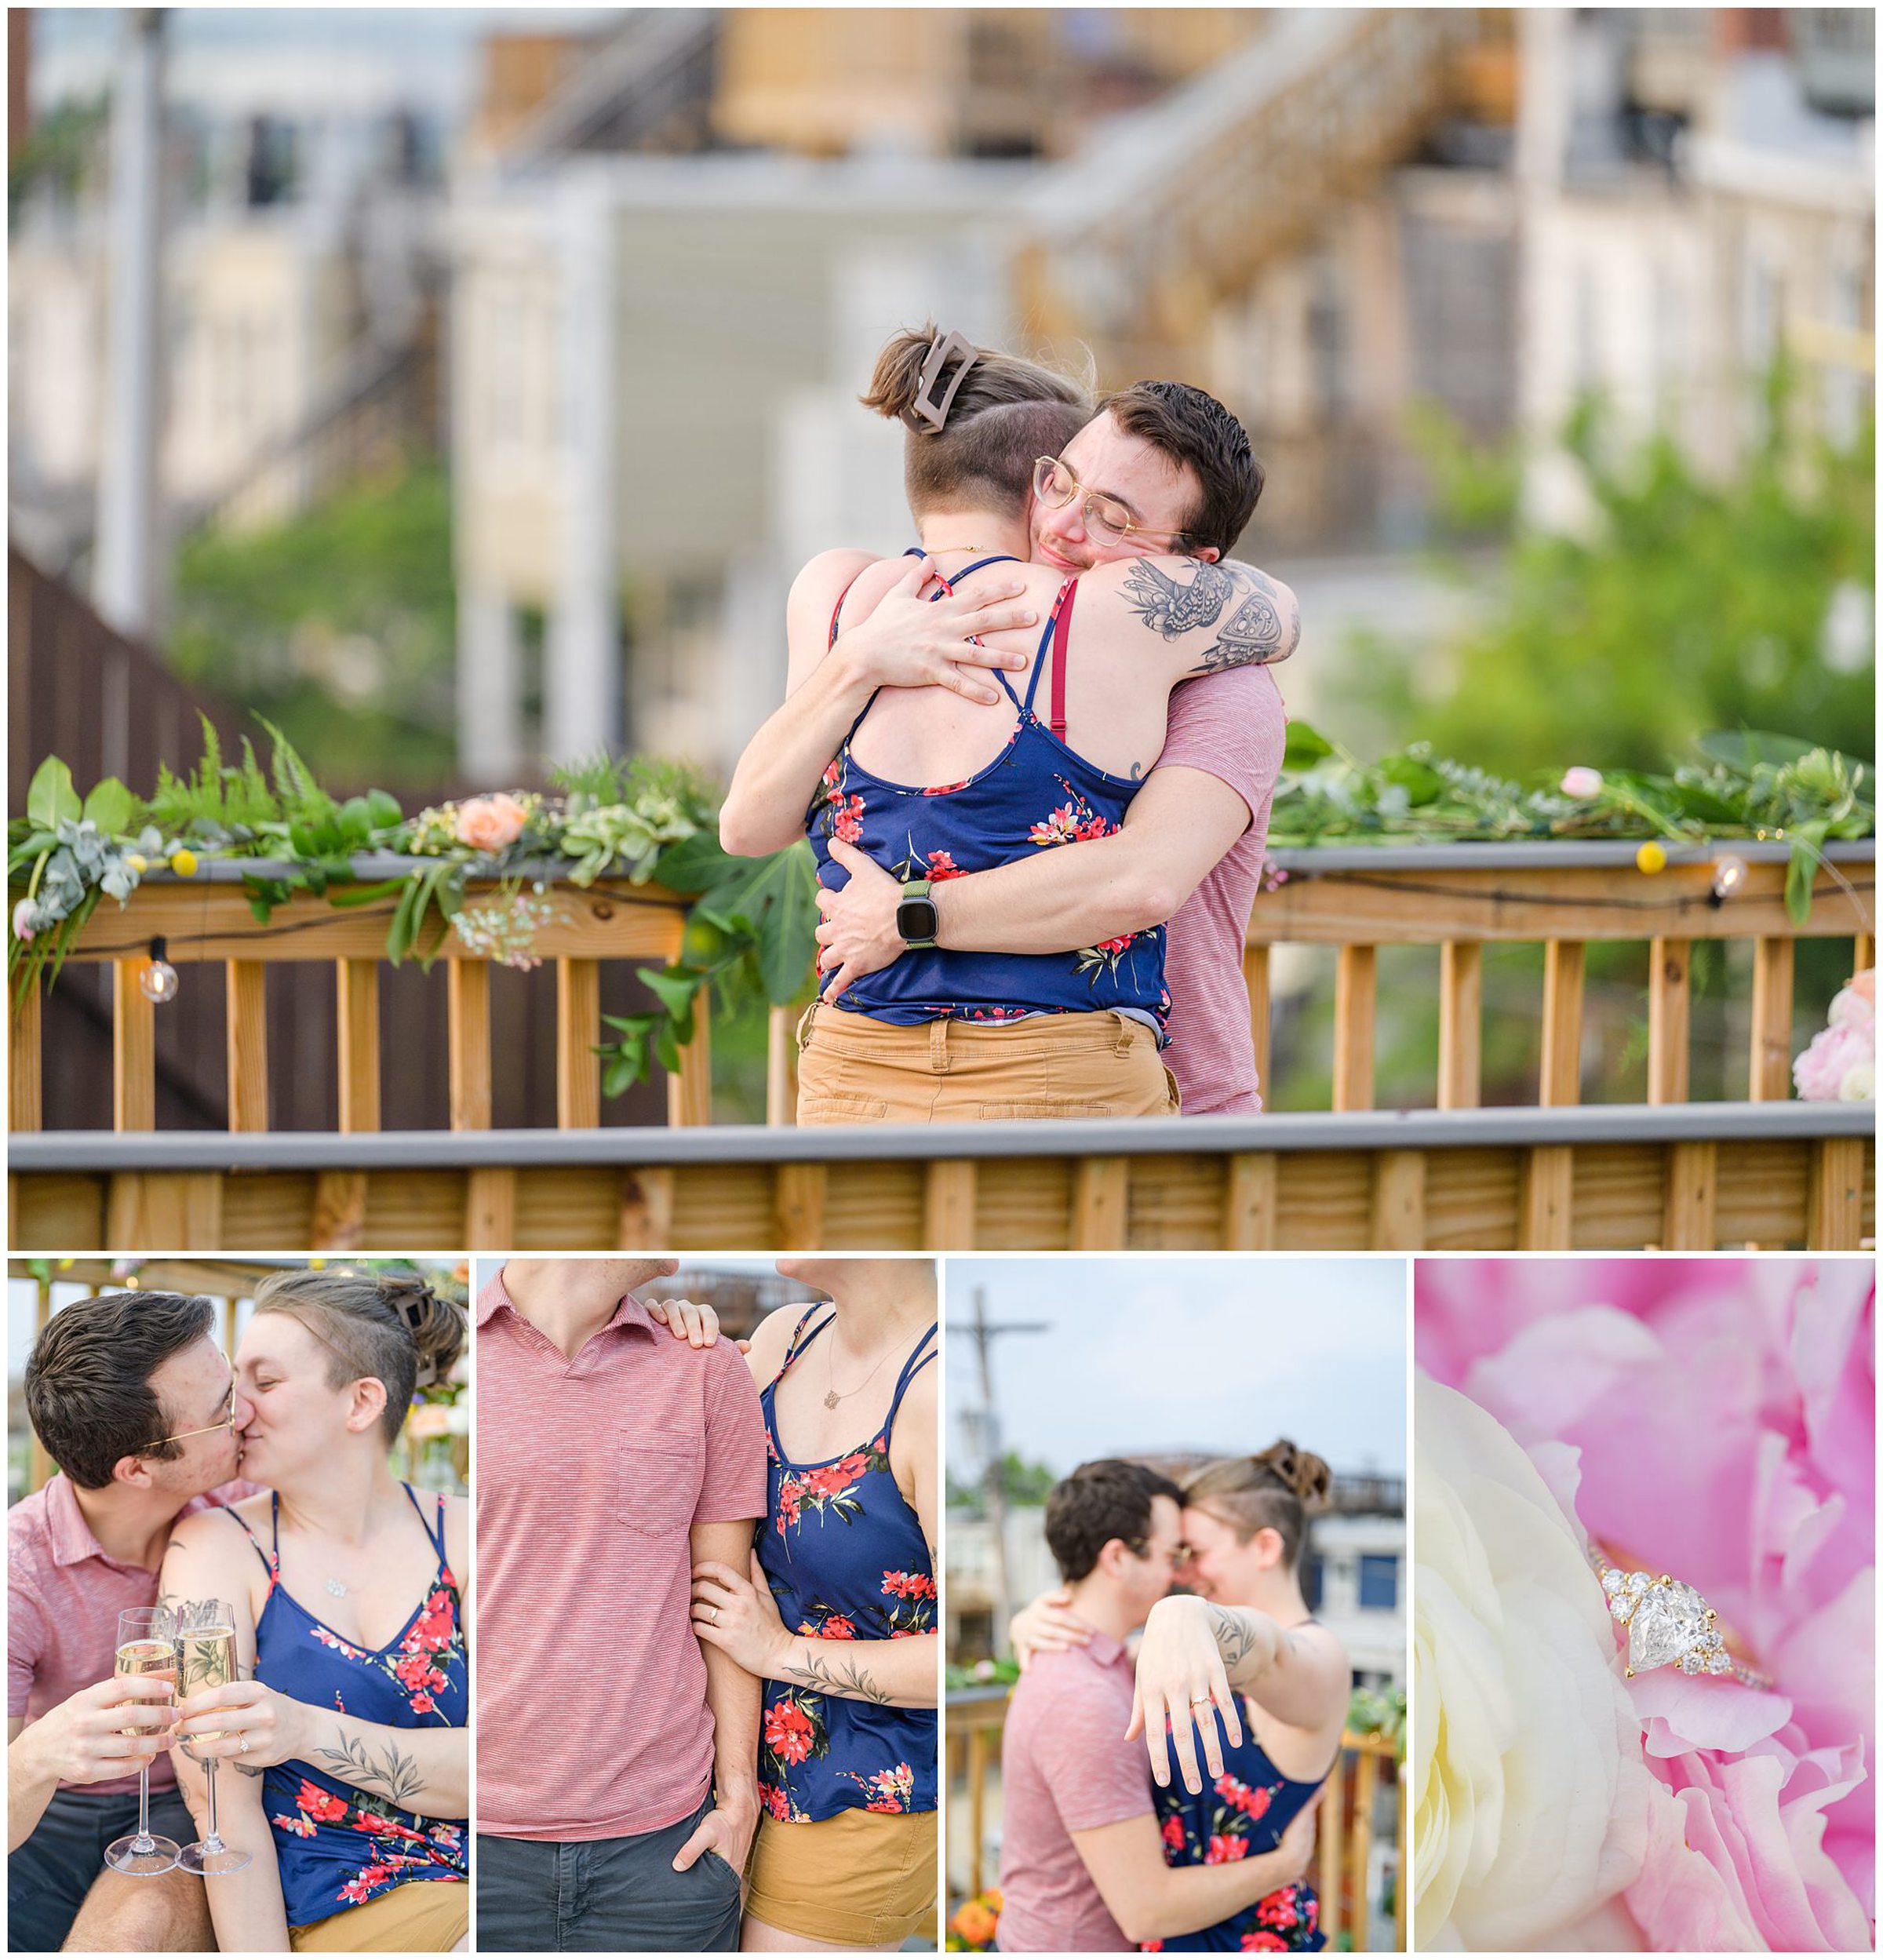 Sarah and Brenton's surprise proposal at their apartment rooftop in Baltimore, Maryland photographed by Baltimore Wedding Photographer Cait Kramer.